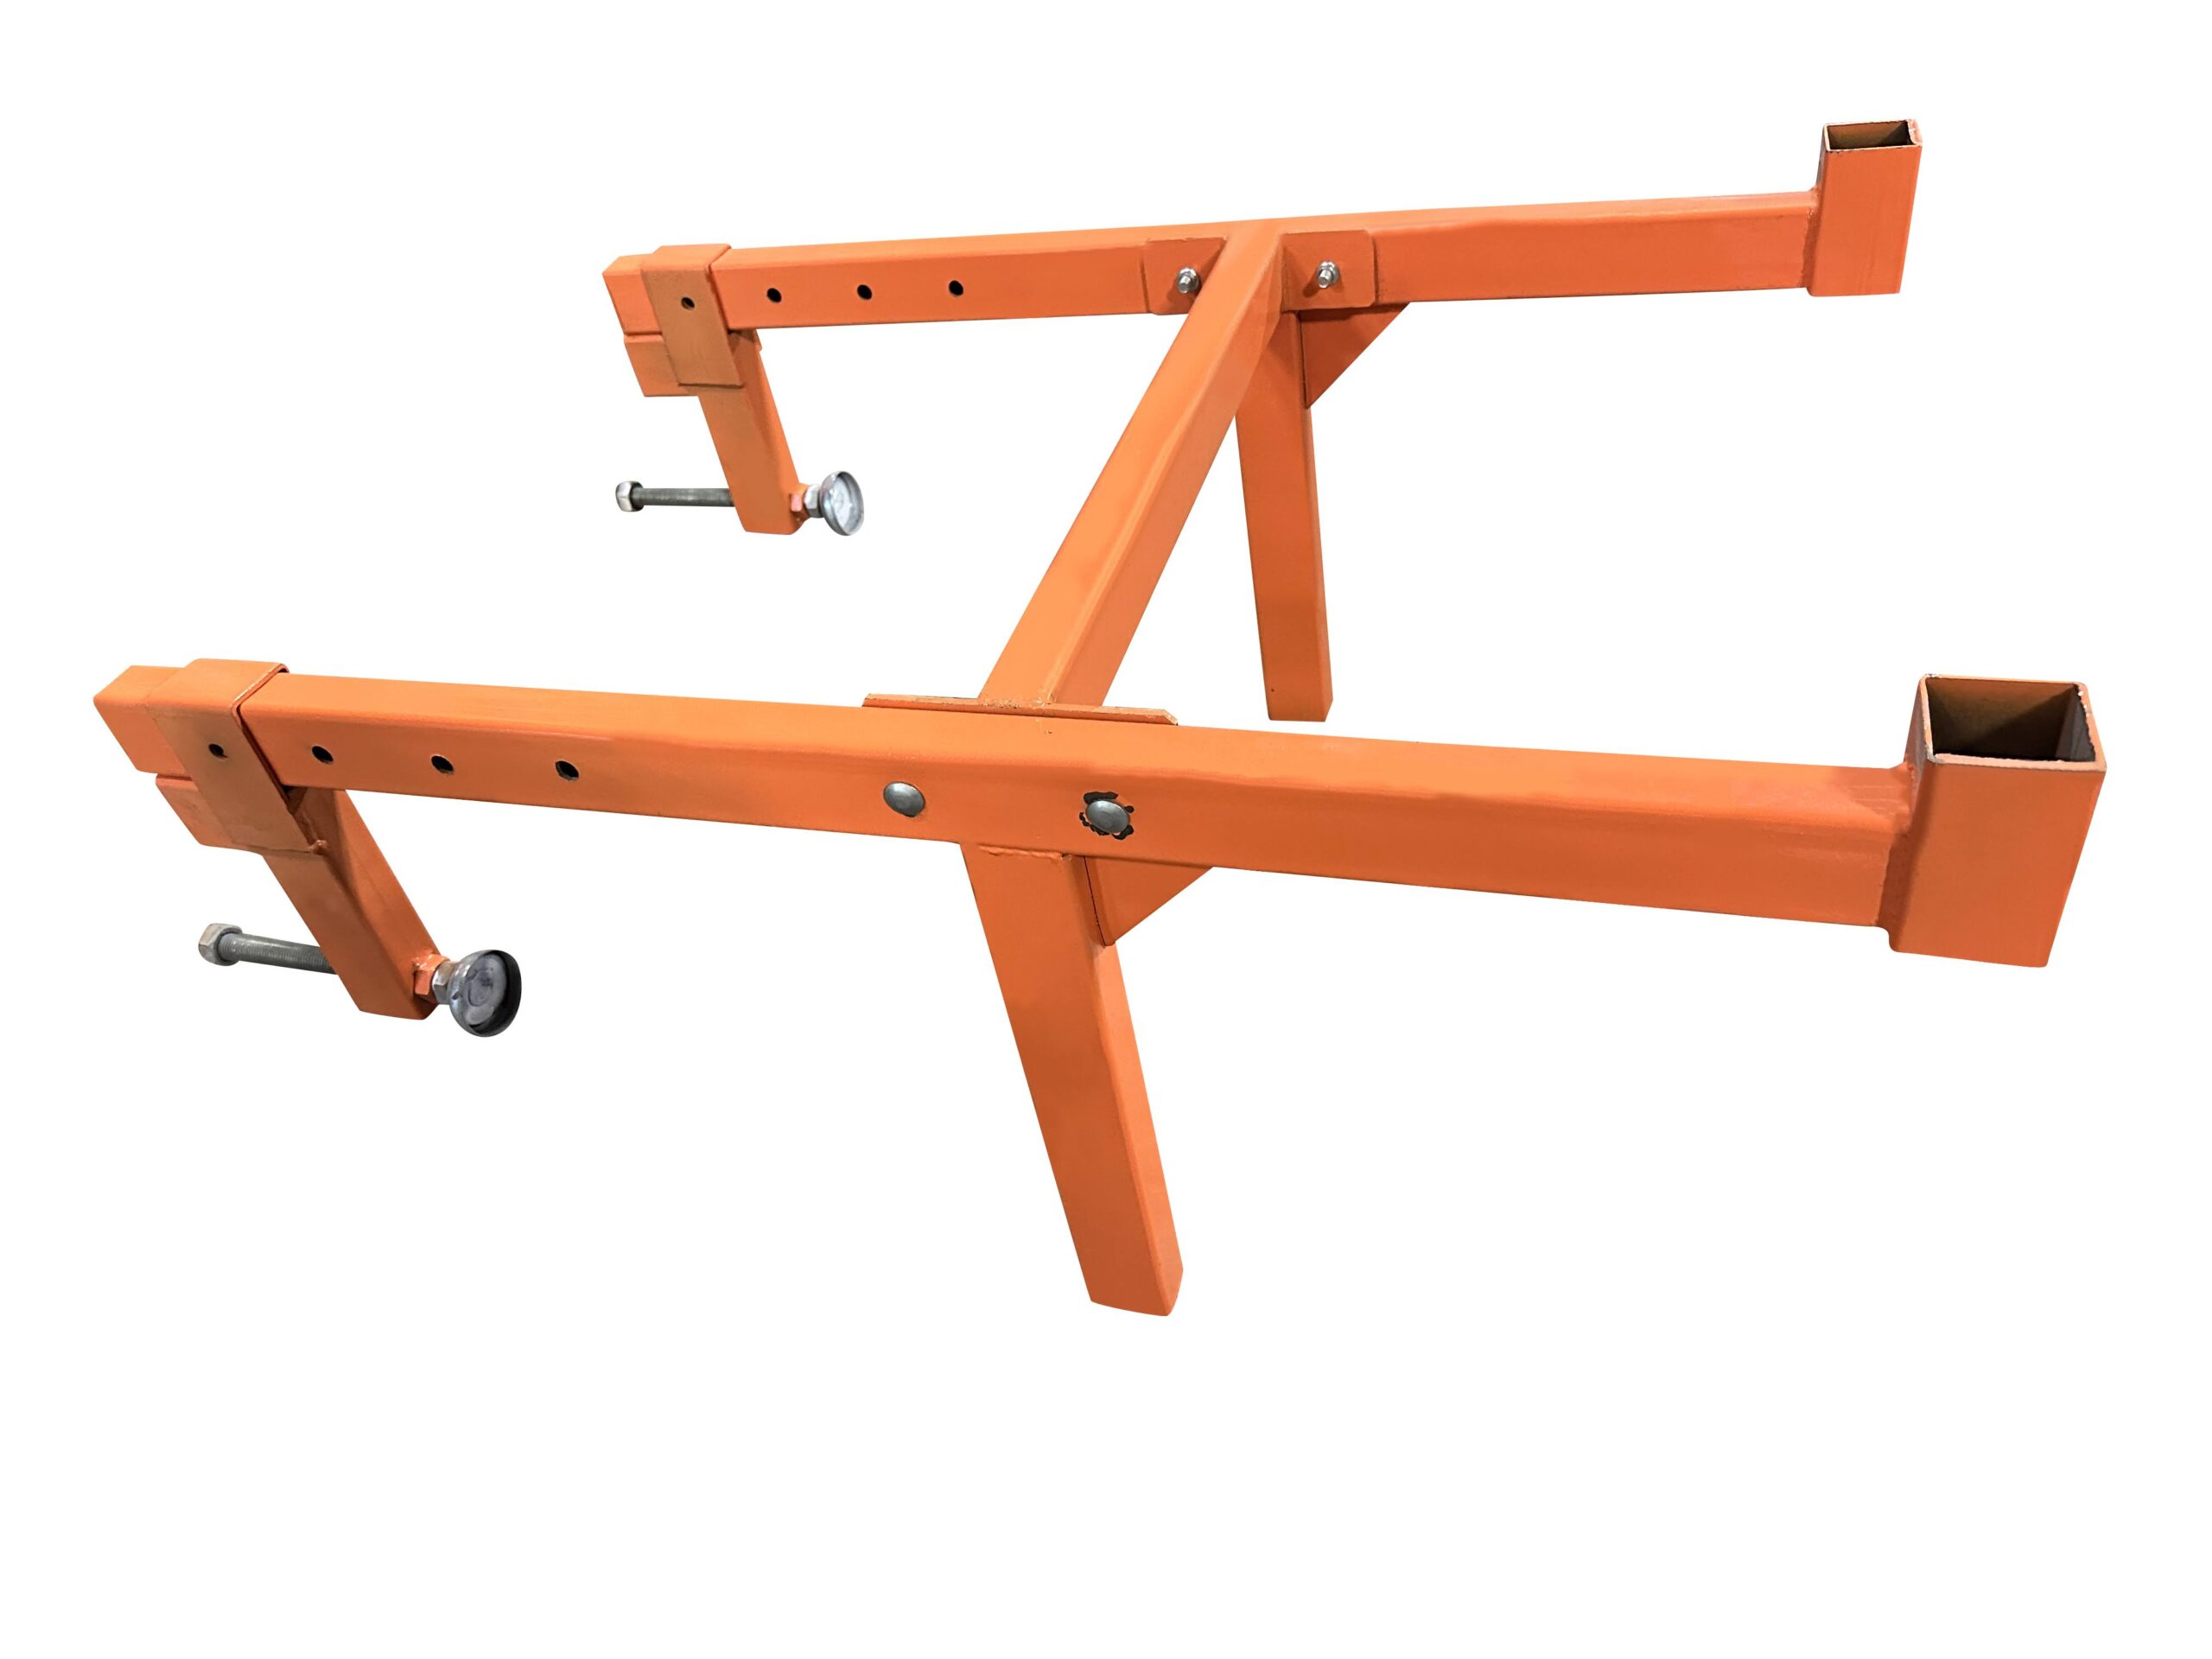 anchor roof,roof anchor,temporary roof anchor system,support frame, basic support frame,window anchor,scaffold anchor,pitched roof outrigger,flat roof outrigger,window parapet outrigger set